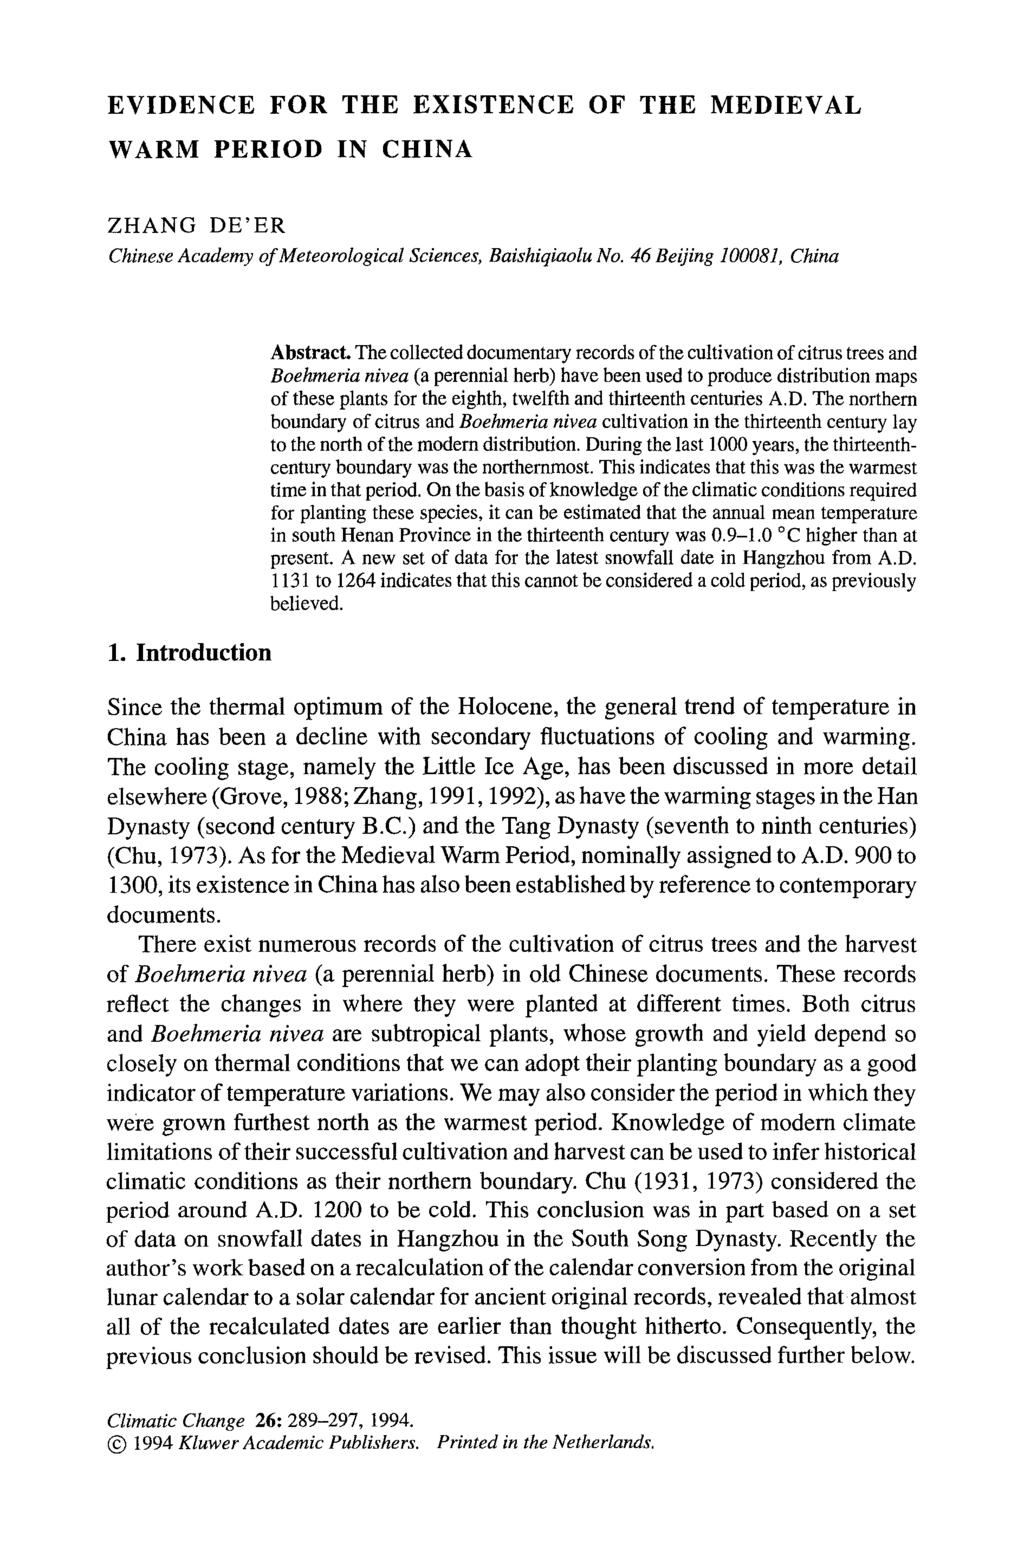 EVIDENCE FOR THE EXISTENCE OF THE MEDIEVAL WARM PERIOD IN CHINA ZHANG DE'ER Chinese Academy of Meteorological Sciences, Baishiqiaolu No. 46 Beijing 100081, China 1. Introduction Abstract.